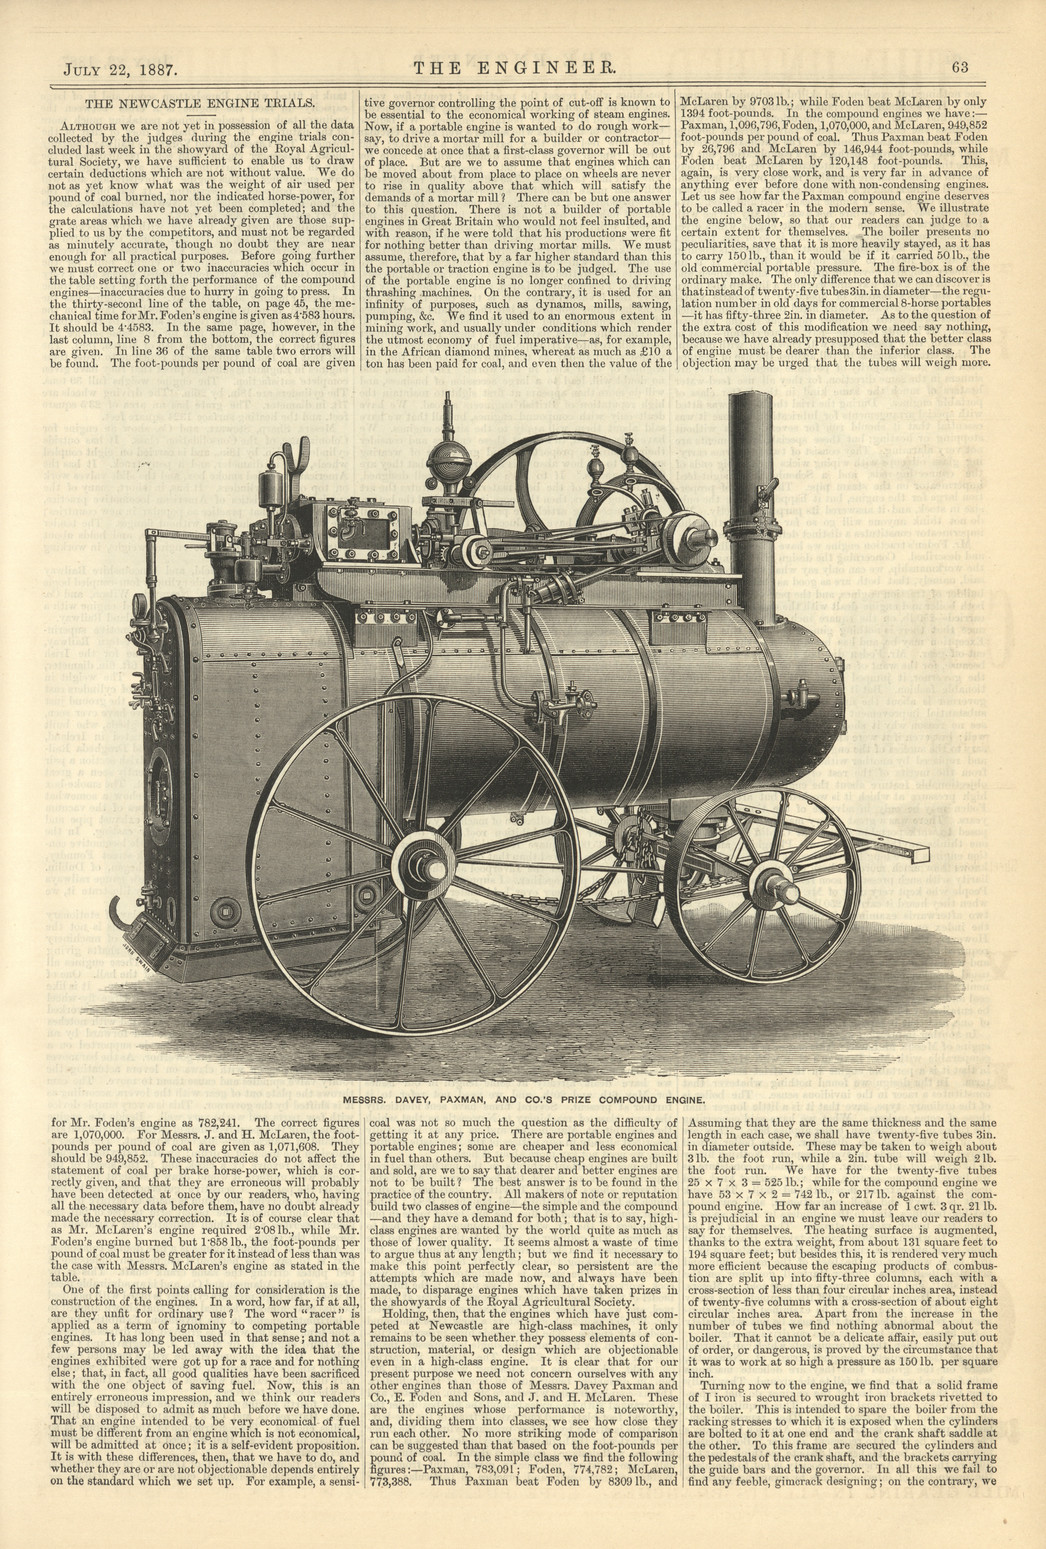 The Engineer, Vol.64, 22 July